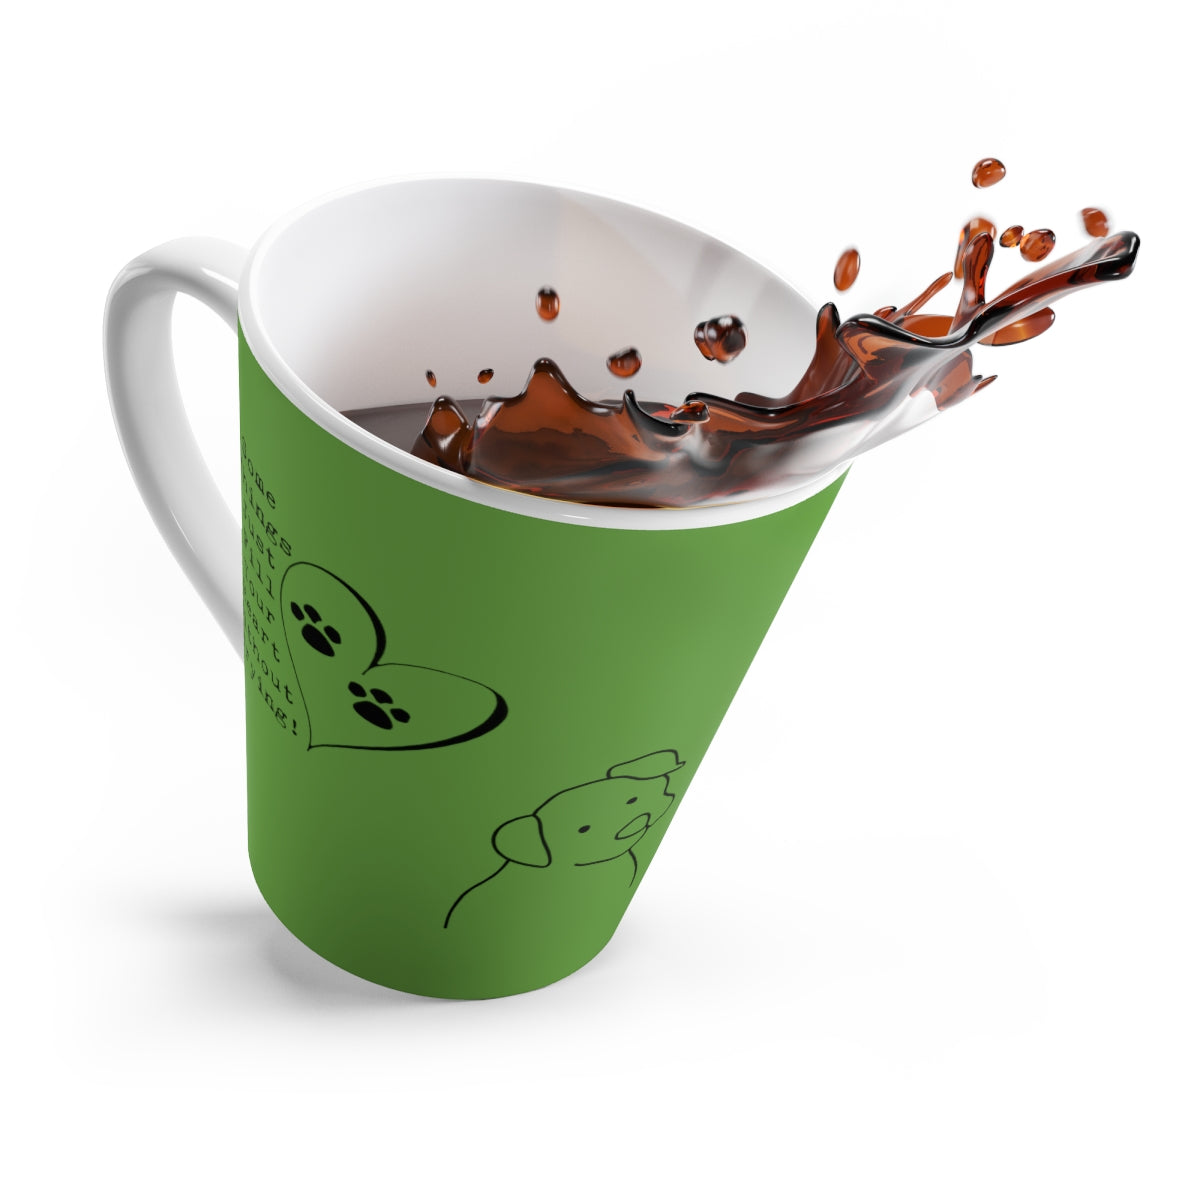 Green Some Things Fill Your Heart Without Trying Pup - Heart and Paw Latte Mug ~ Dog Lovers Coffee Tea Drinkware